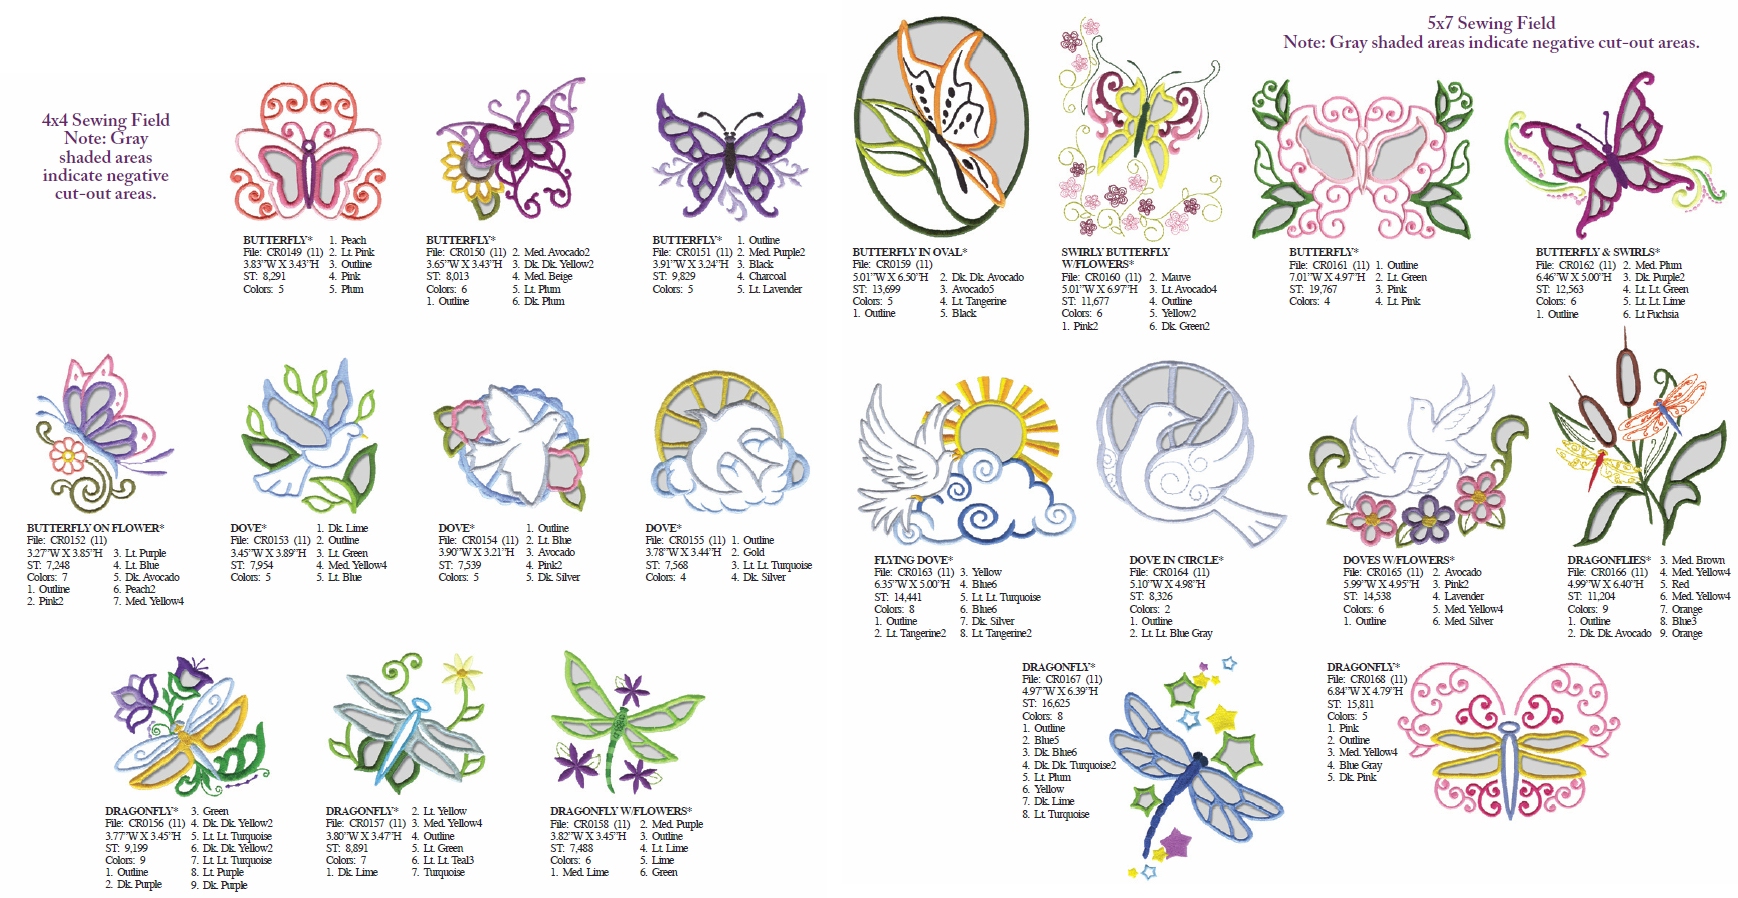 Cutwork Butterflies & More Embroidery Designs by Dakota Collectibles on Multi-Format CD-ROM 970404